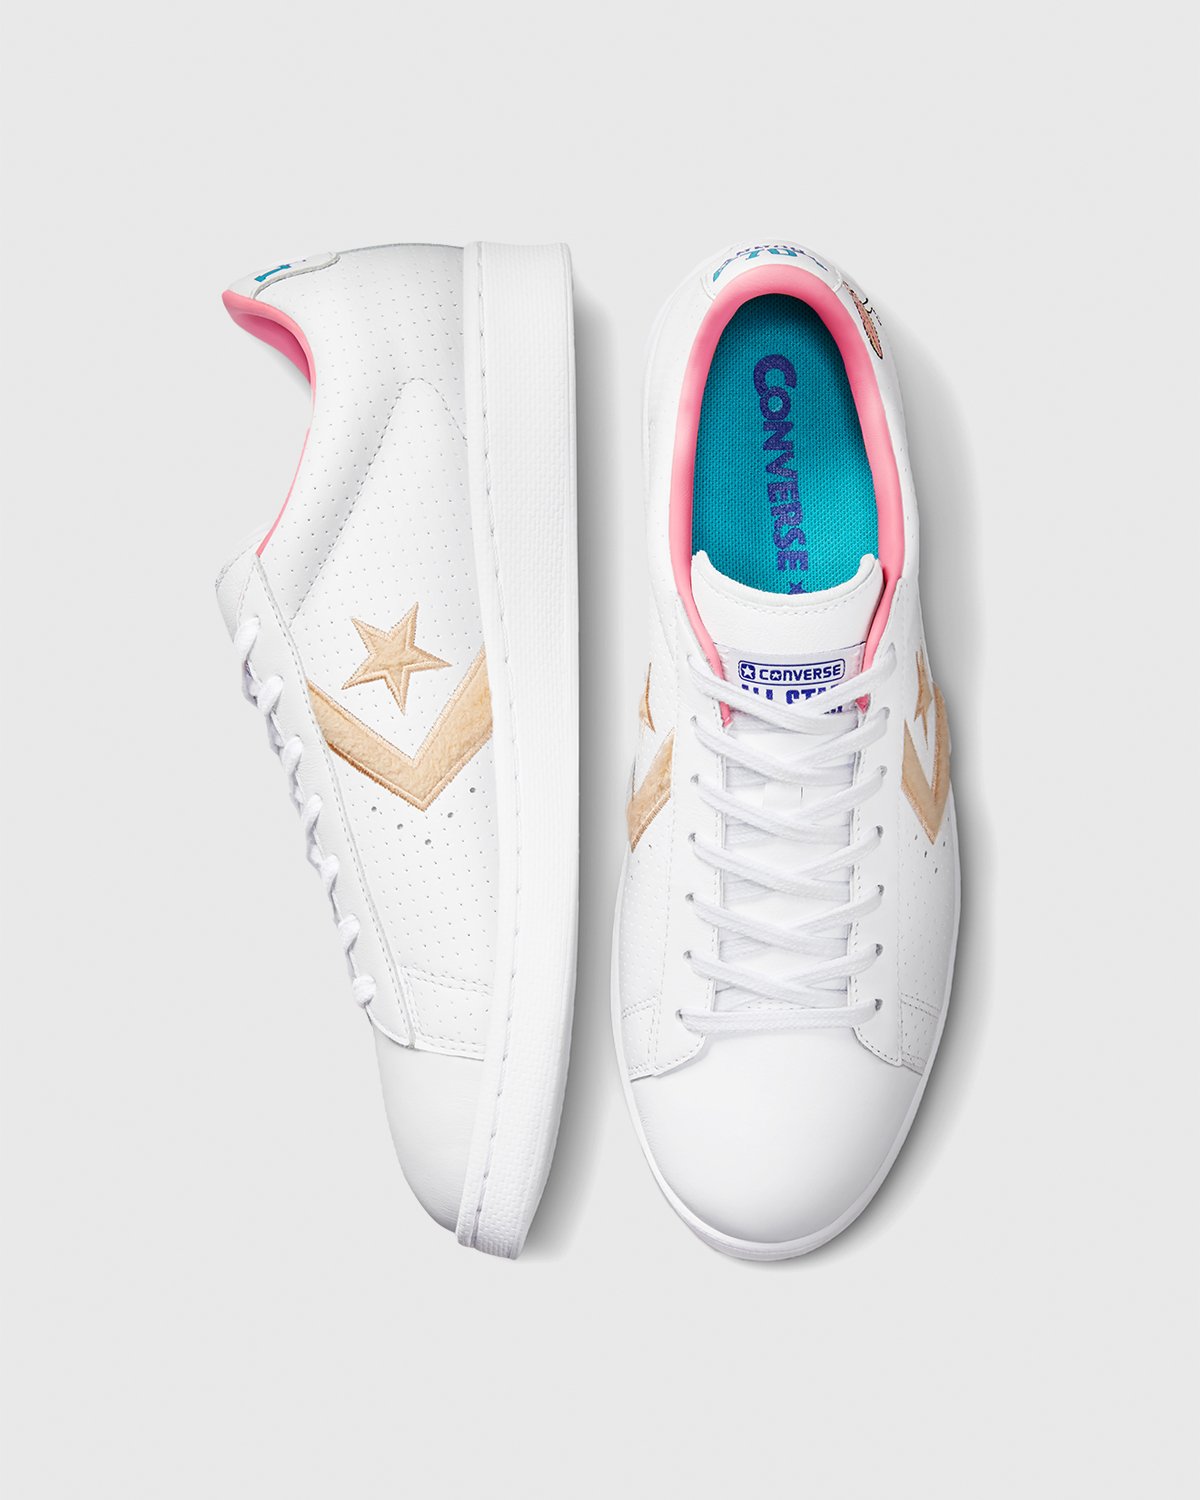 Converse x Space Jam - Pro Leather White - Footwear - White - Image 3